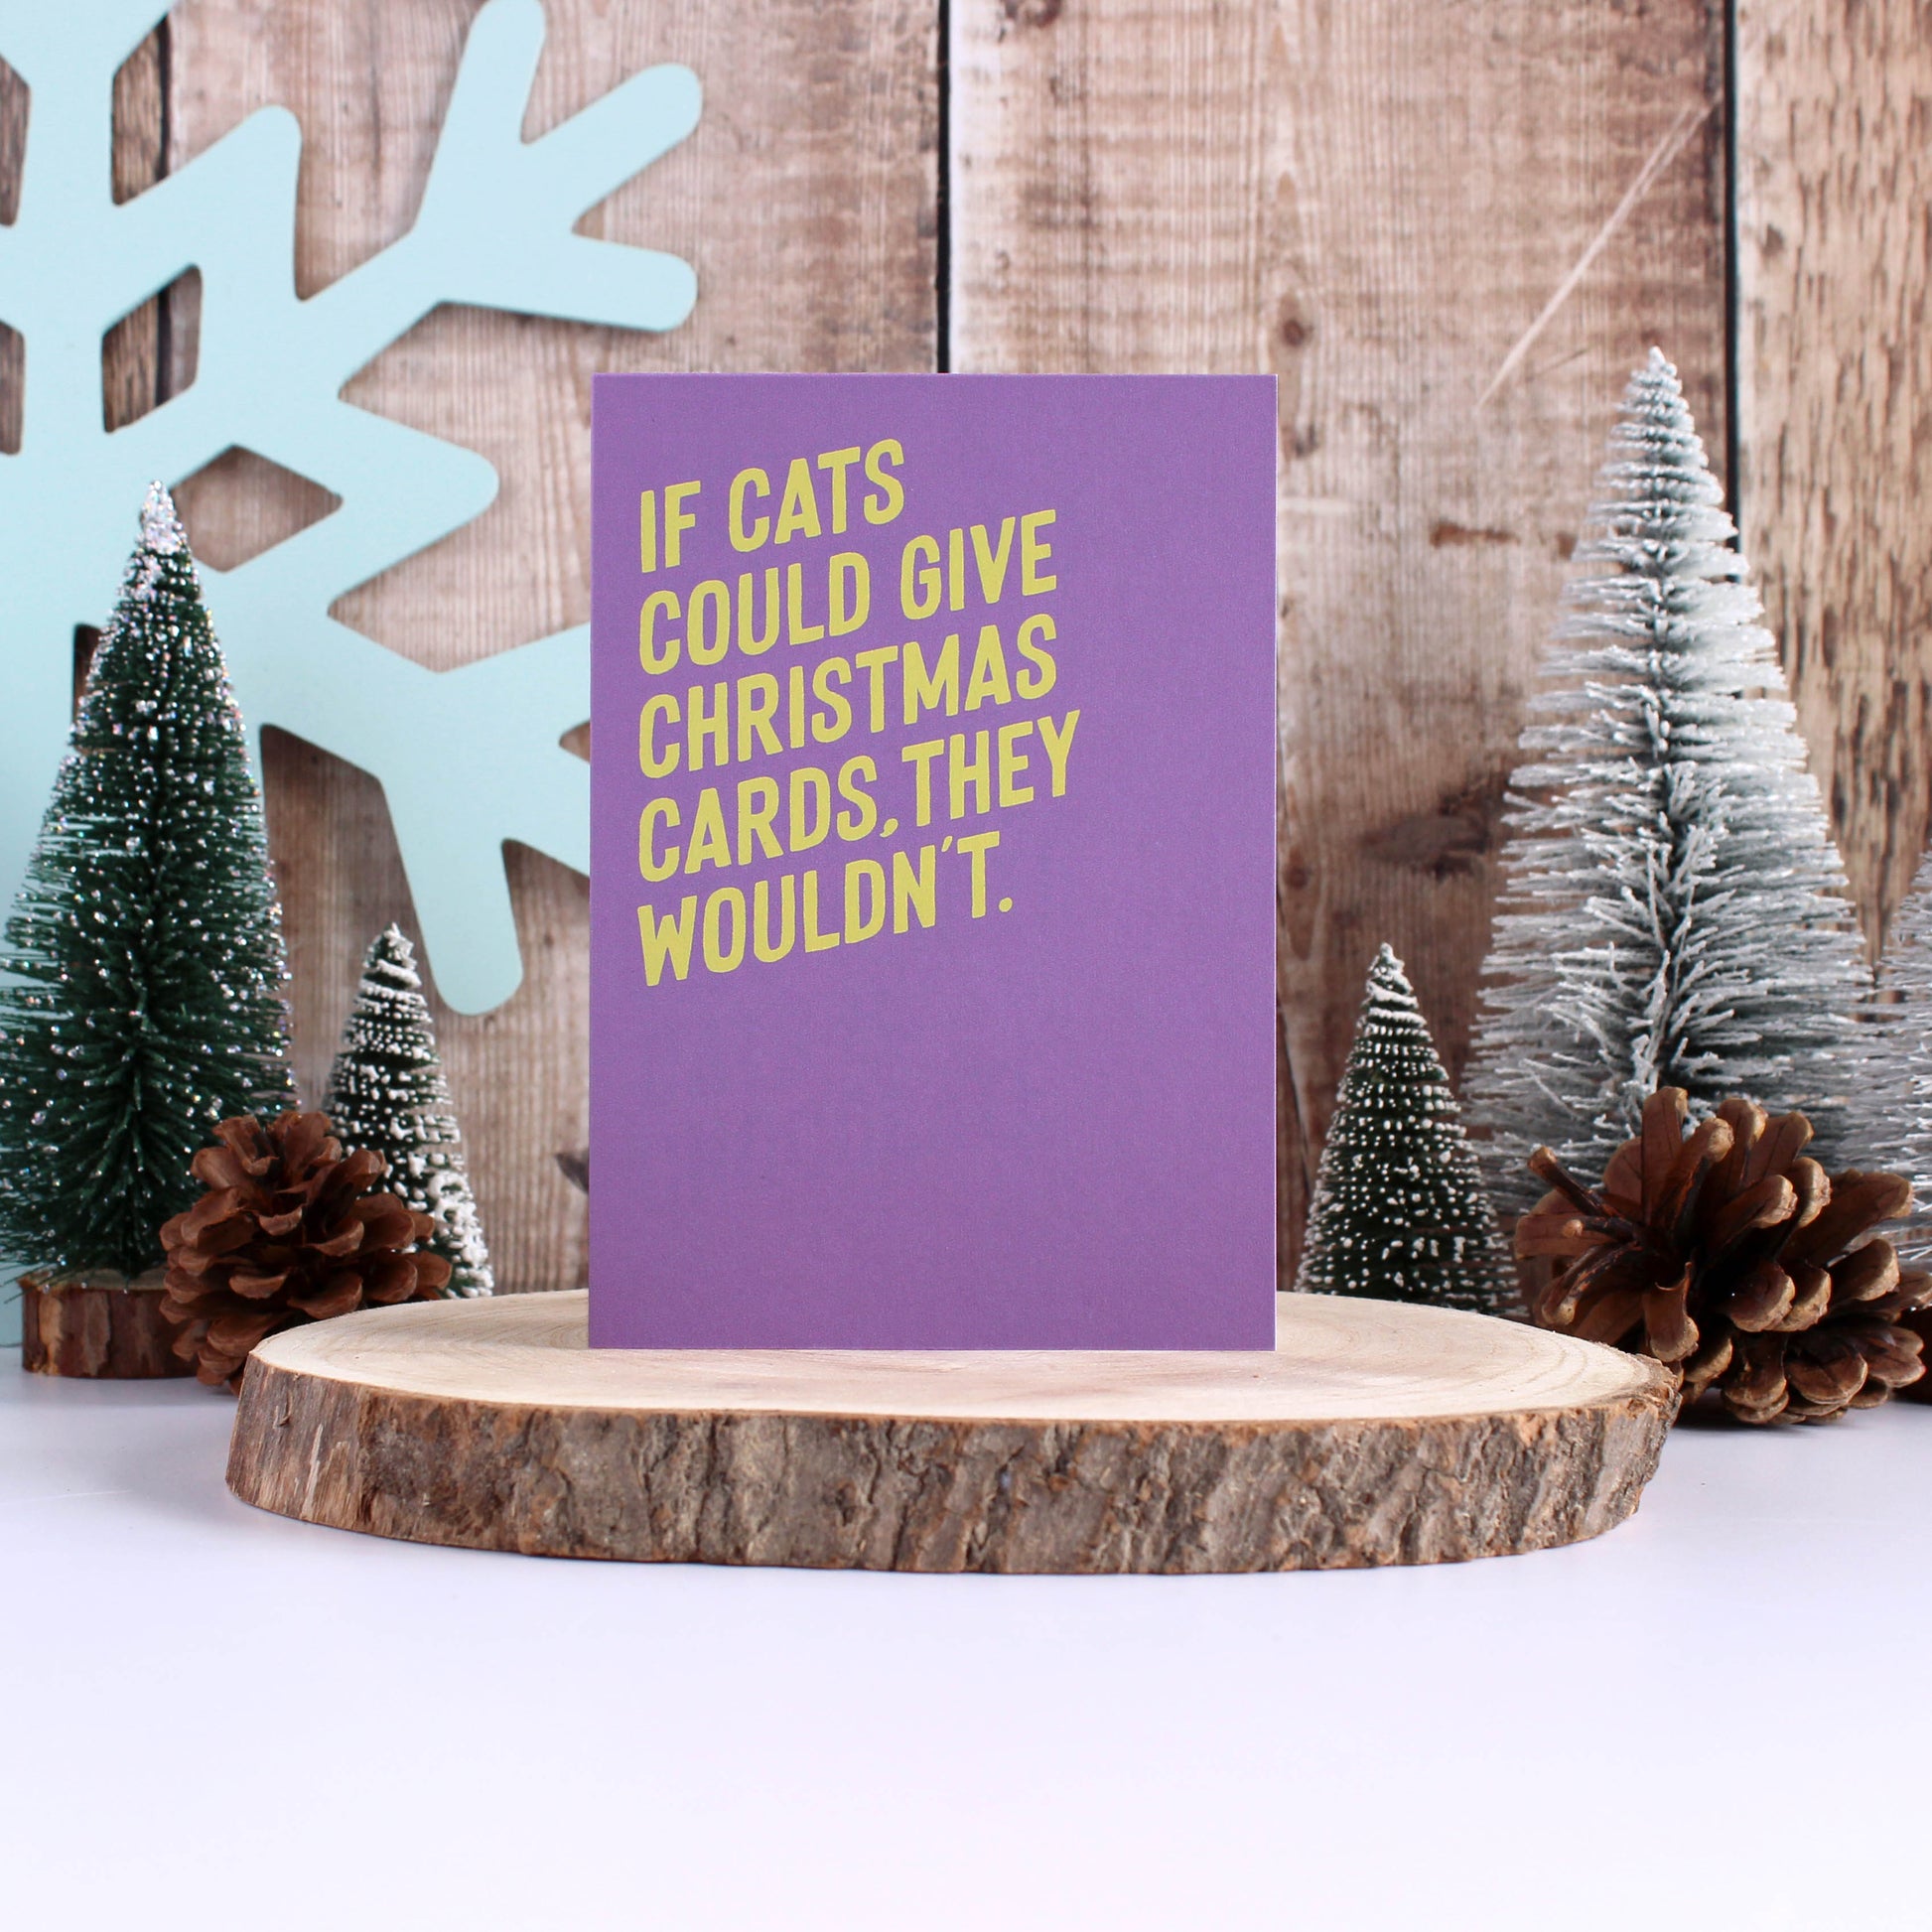 If cats could give Christmas cards they wouldn't Christmas card from Purple Tree Designs